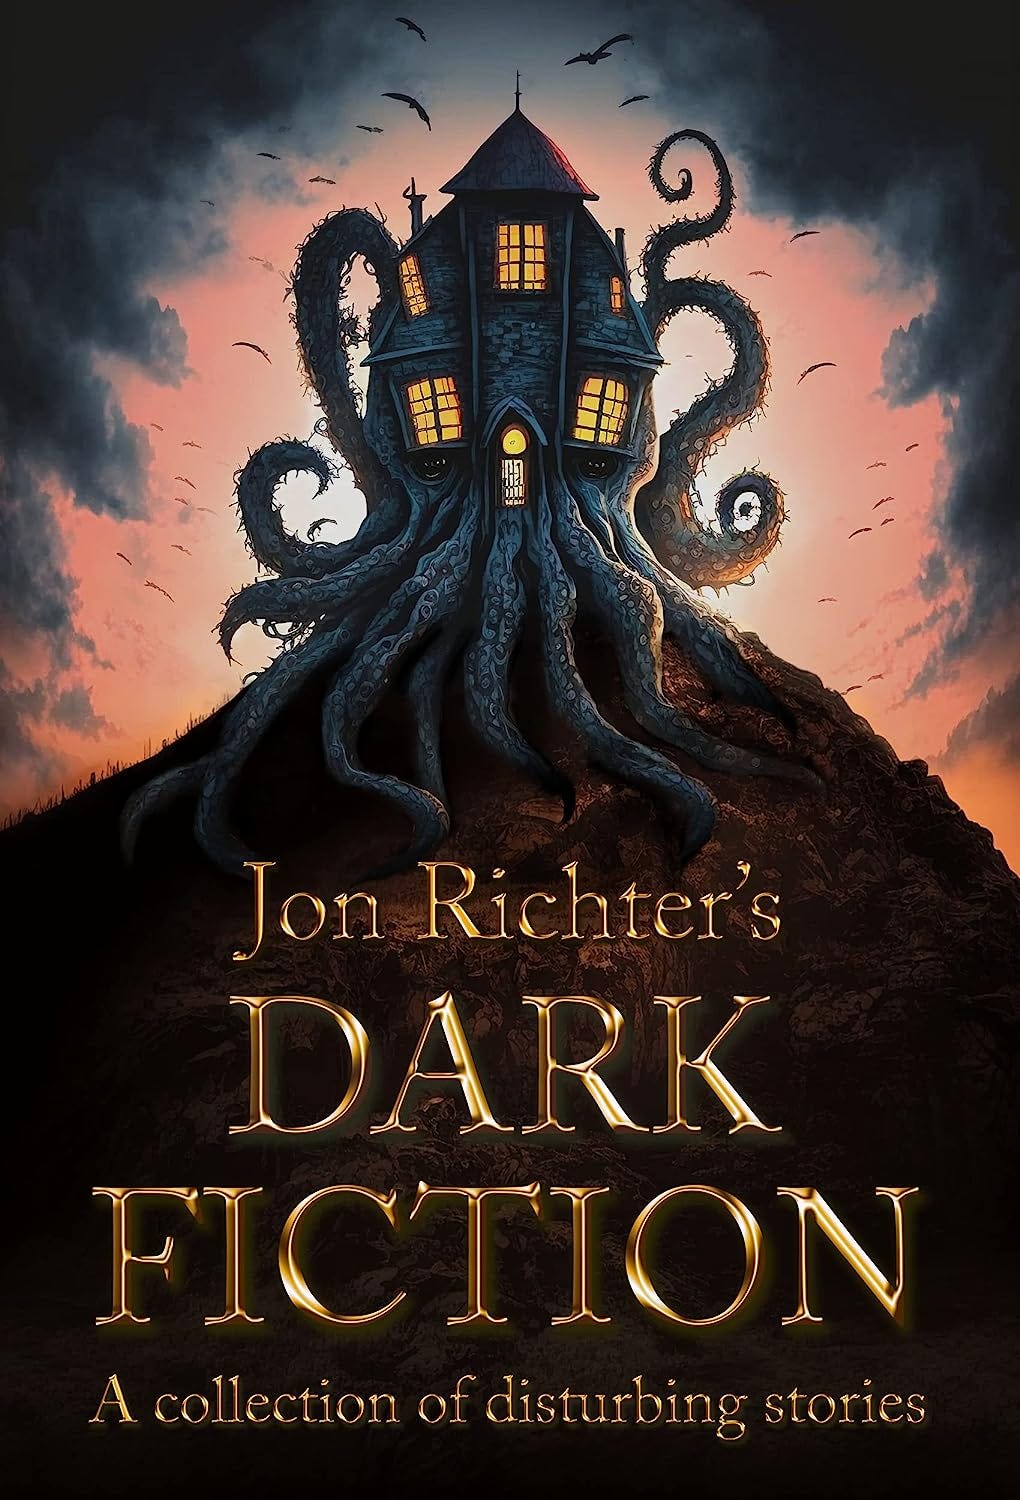 Book cover of Jon Richter's Dark Fiction, showing a creepy tentacled house on a hill.